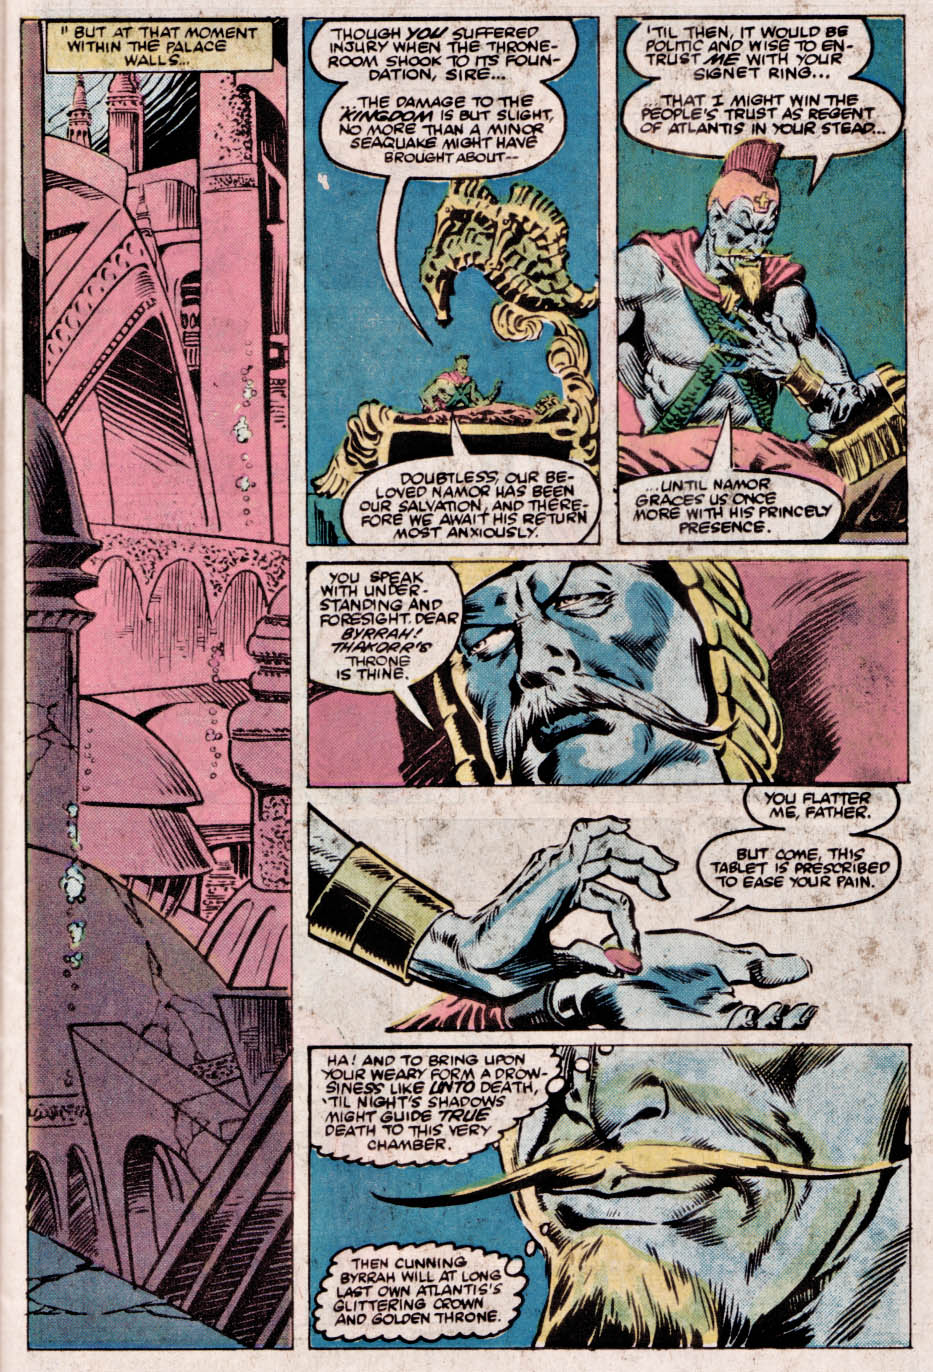 What If? (1977) issue 41 - The Sub-mariner had saved Atlantis from its destiny - Page 8